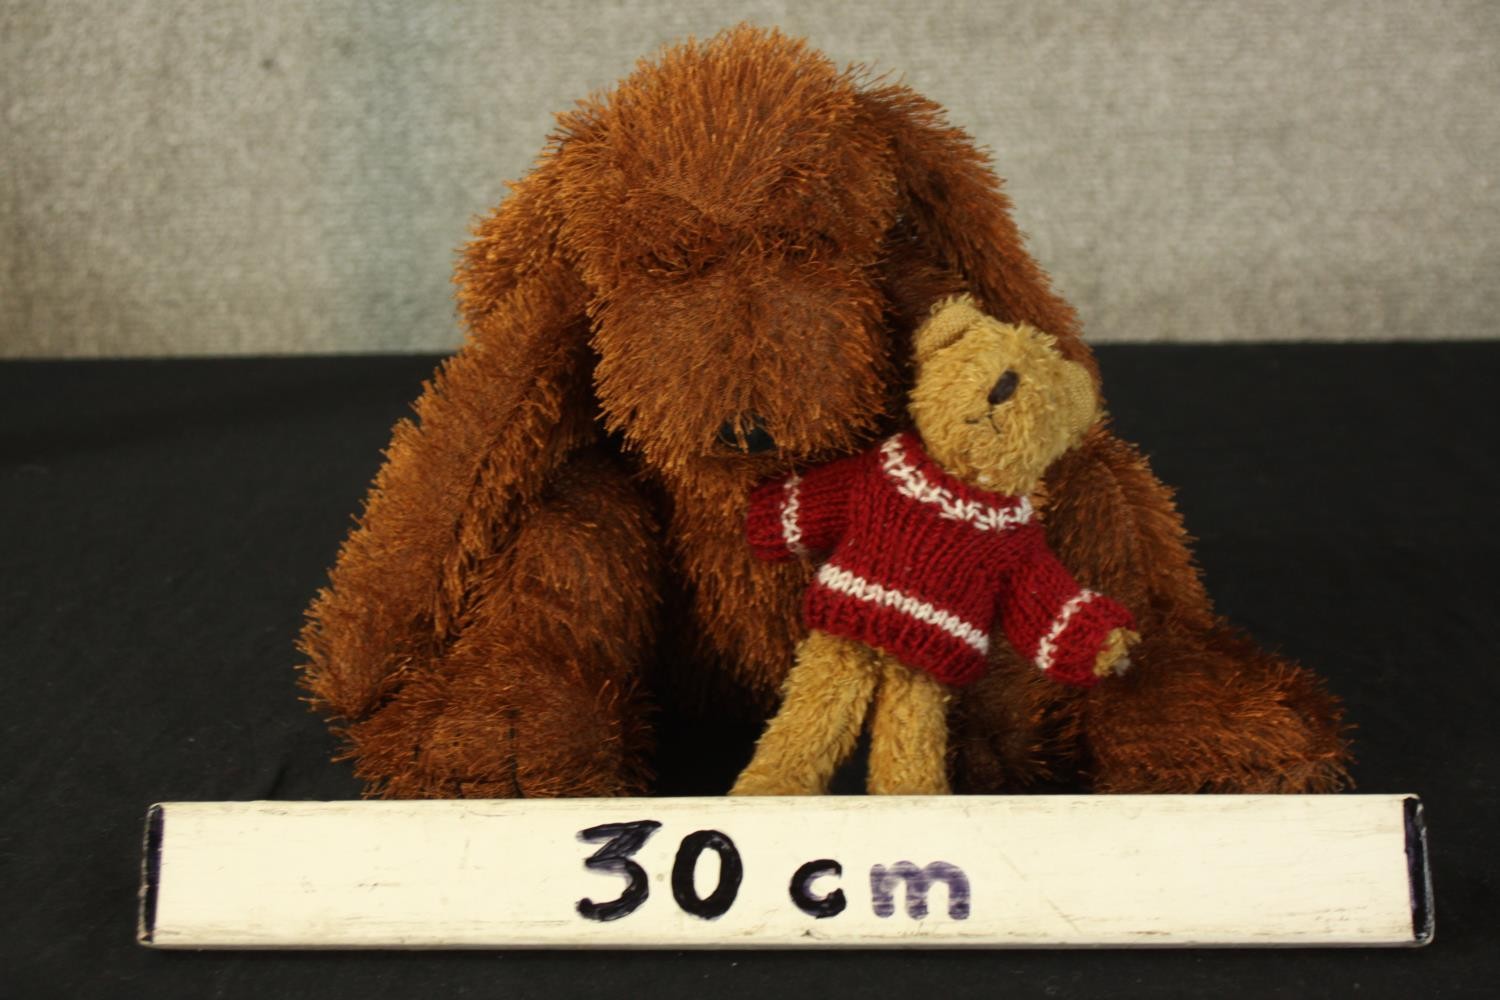 Two Soft toys. a teddy bear and a dog. 30 cm. - Image 2 of 3